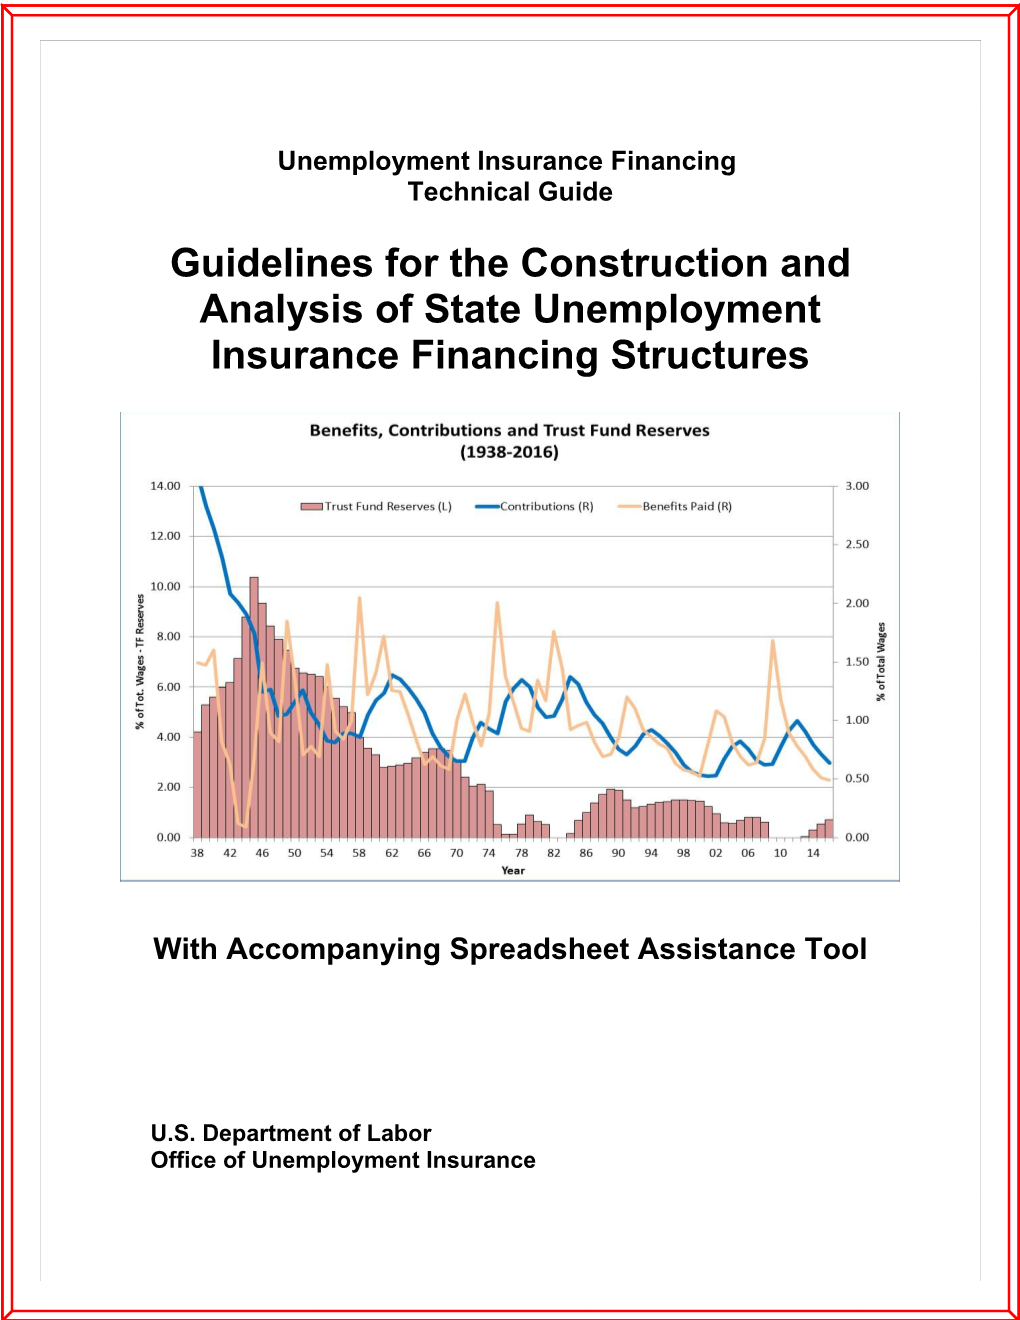 Guidelines for the Construction and Analysis of State Unemployment Insurance Financing